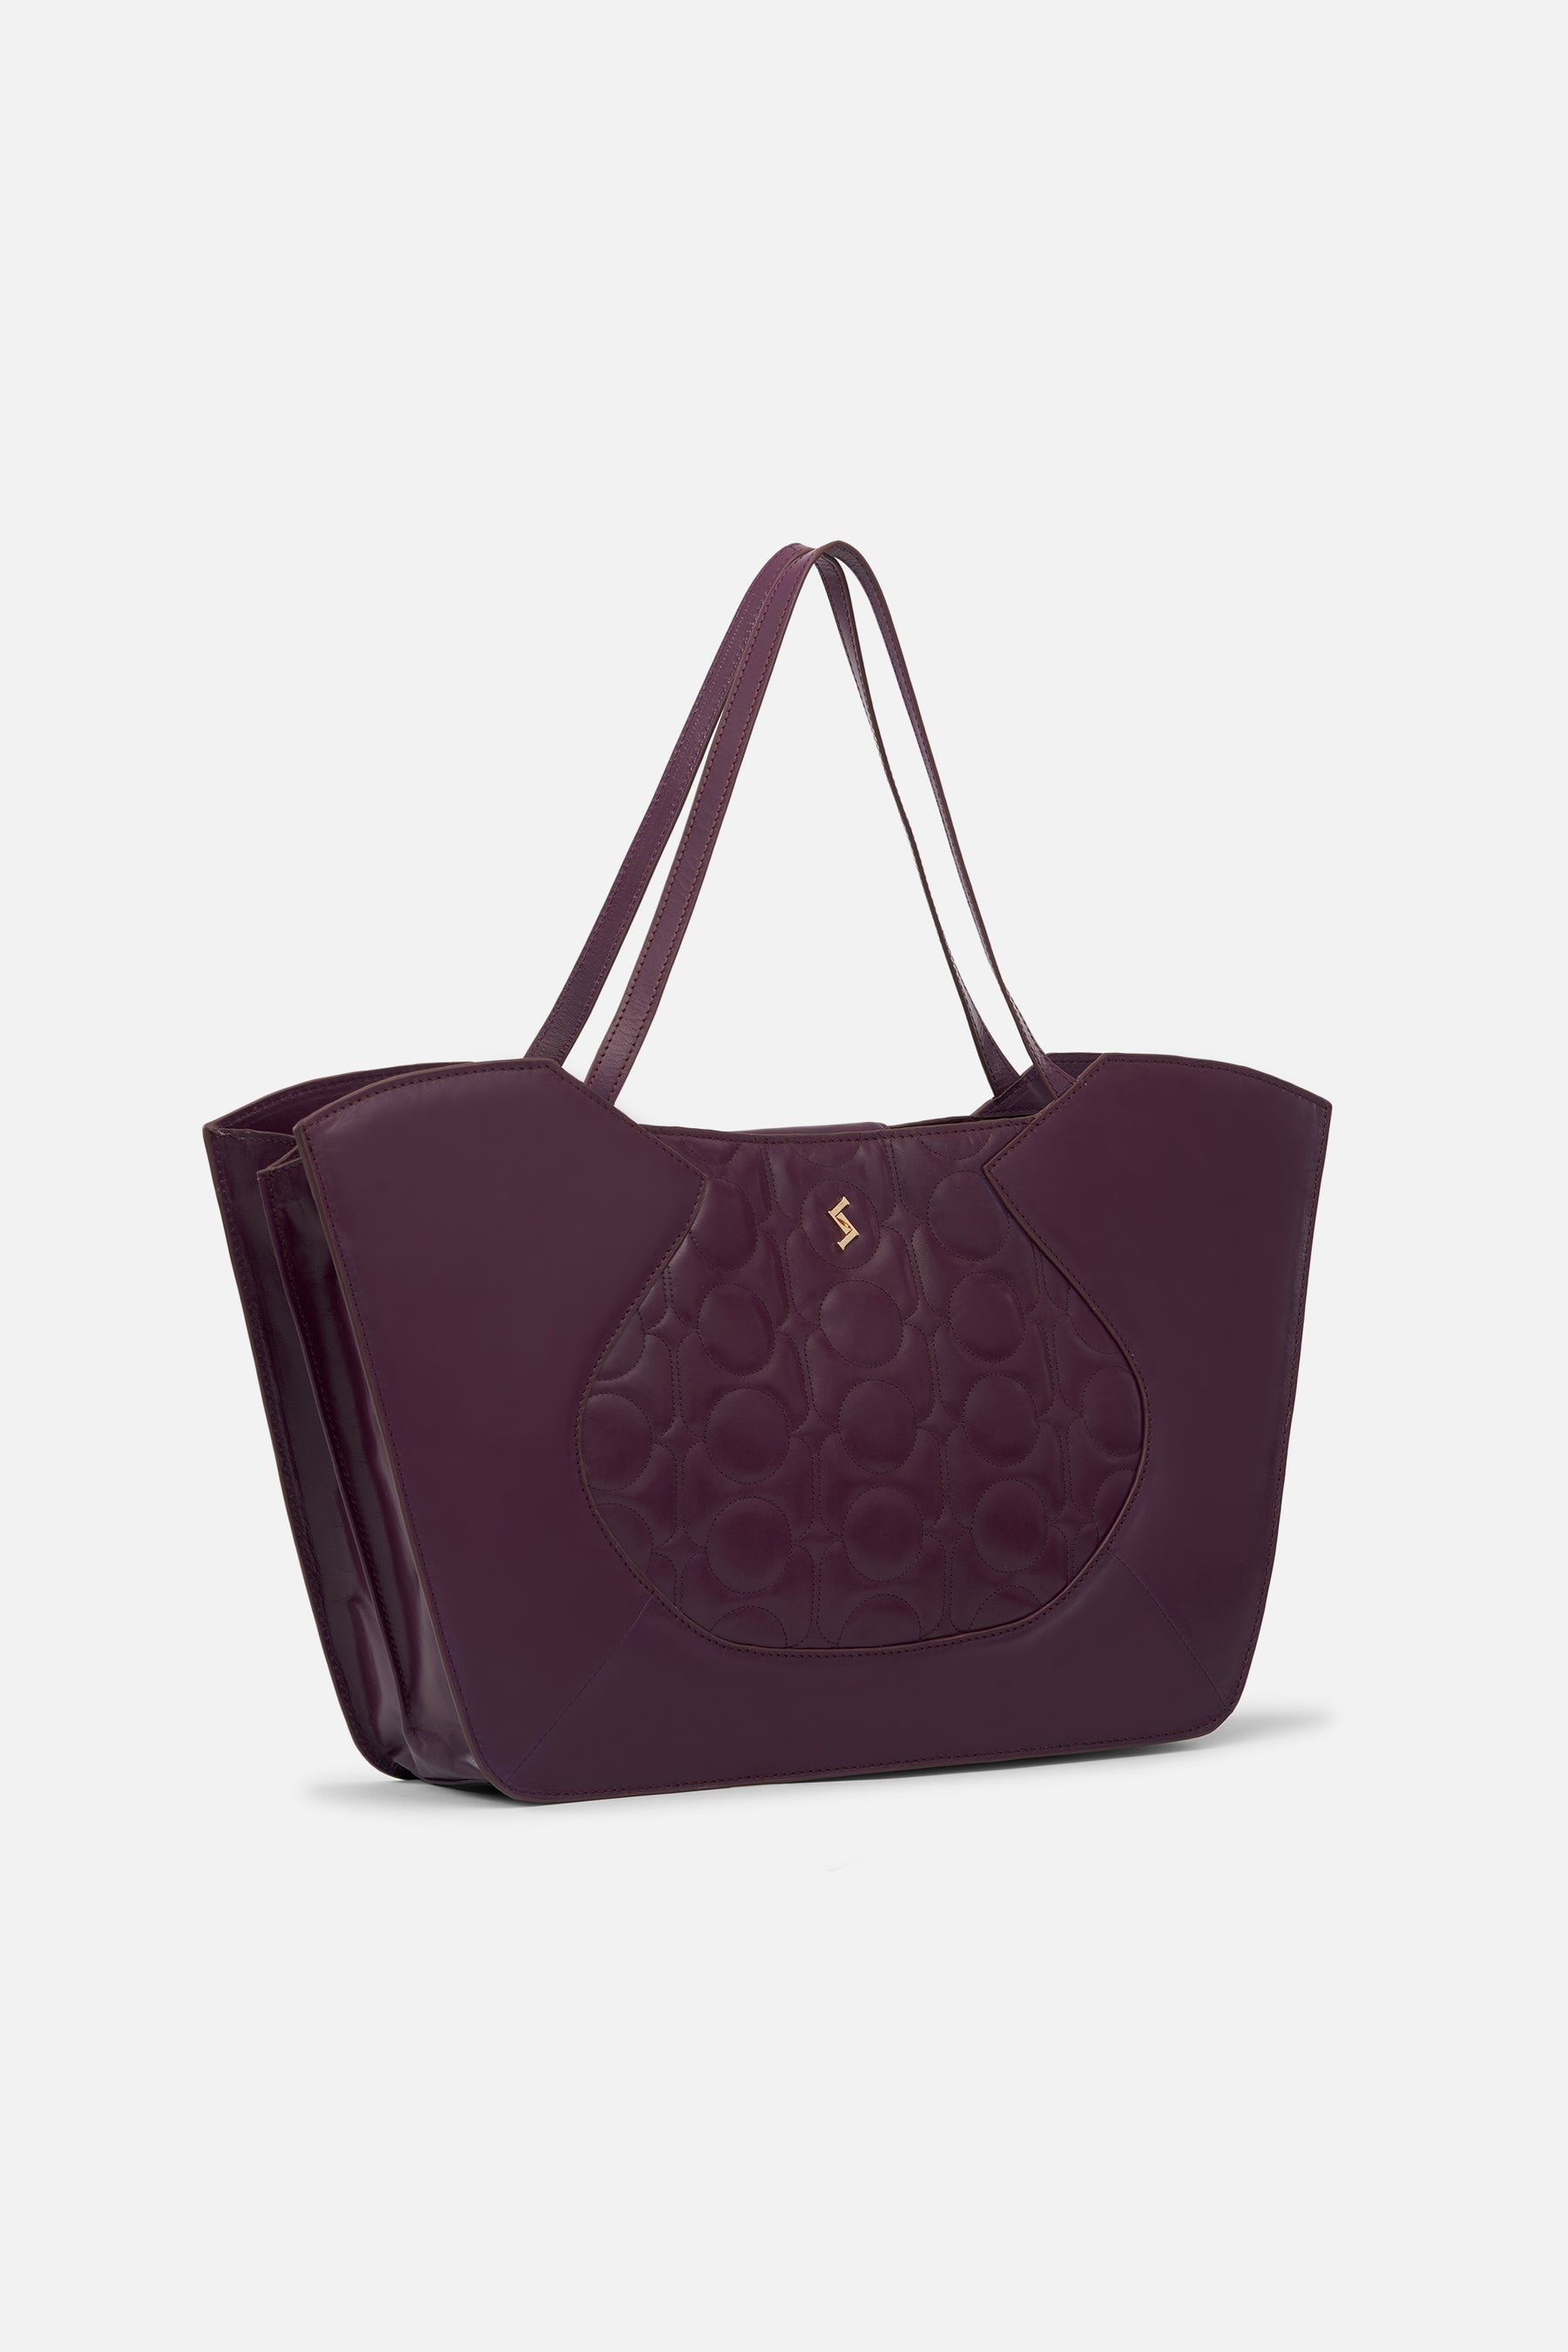 Evelyn - Quilted Tote - Plum